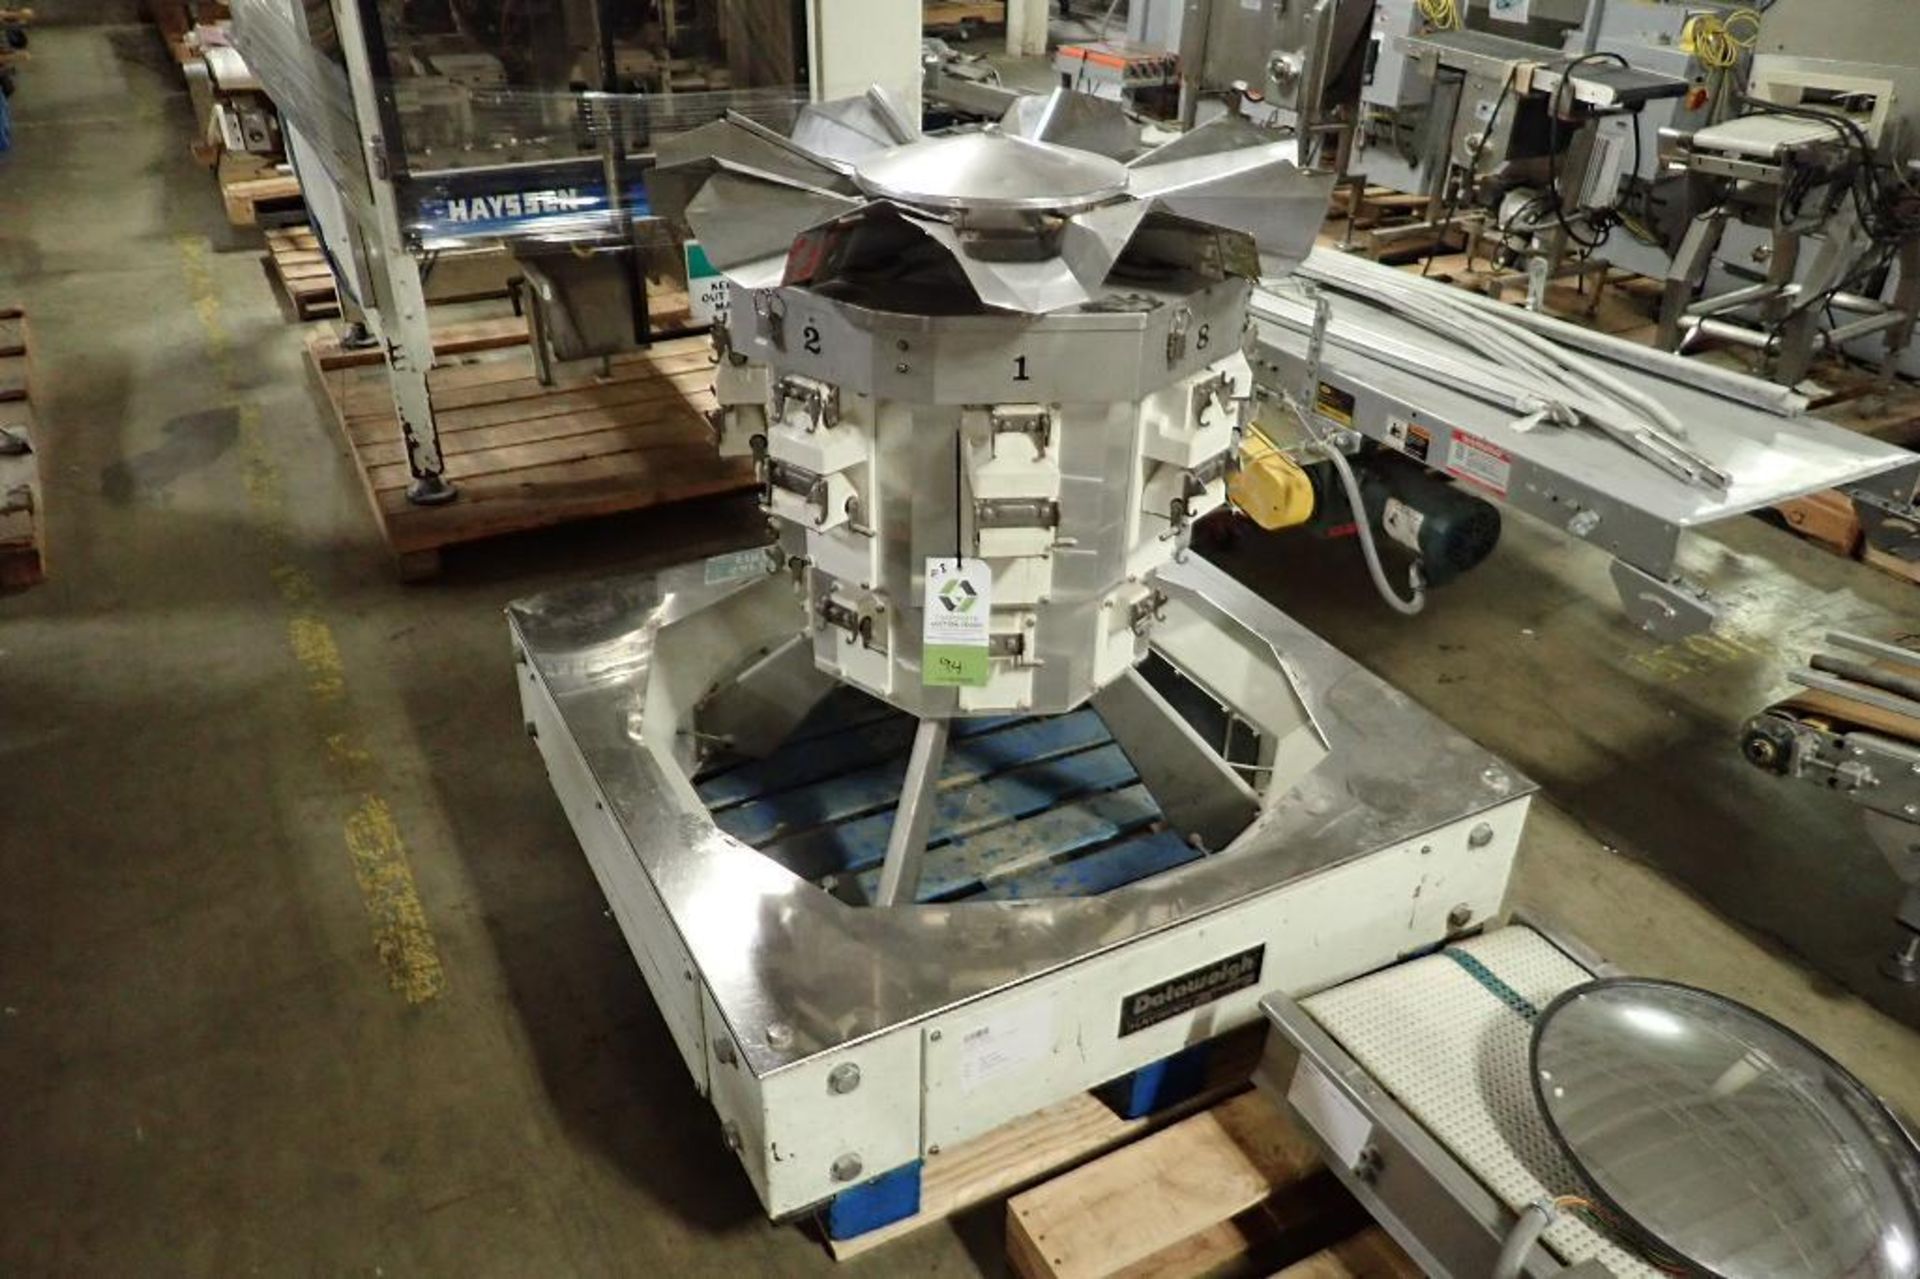 1994 Hayssen Yamato data weigh 8 head scale, Model ADW-508MD, SN 084026/930442, 8 g to 1000 g capaci - Image 2 of 34